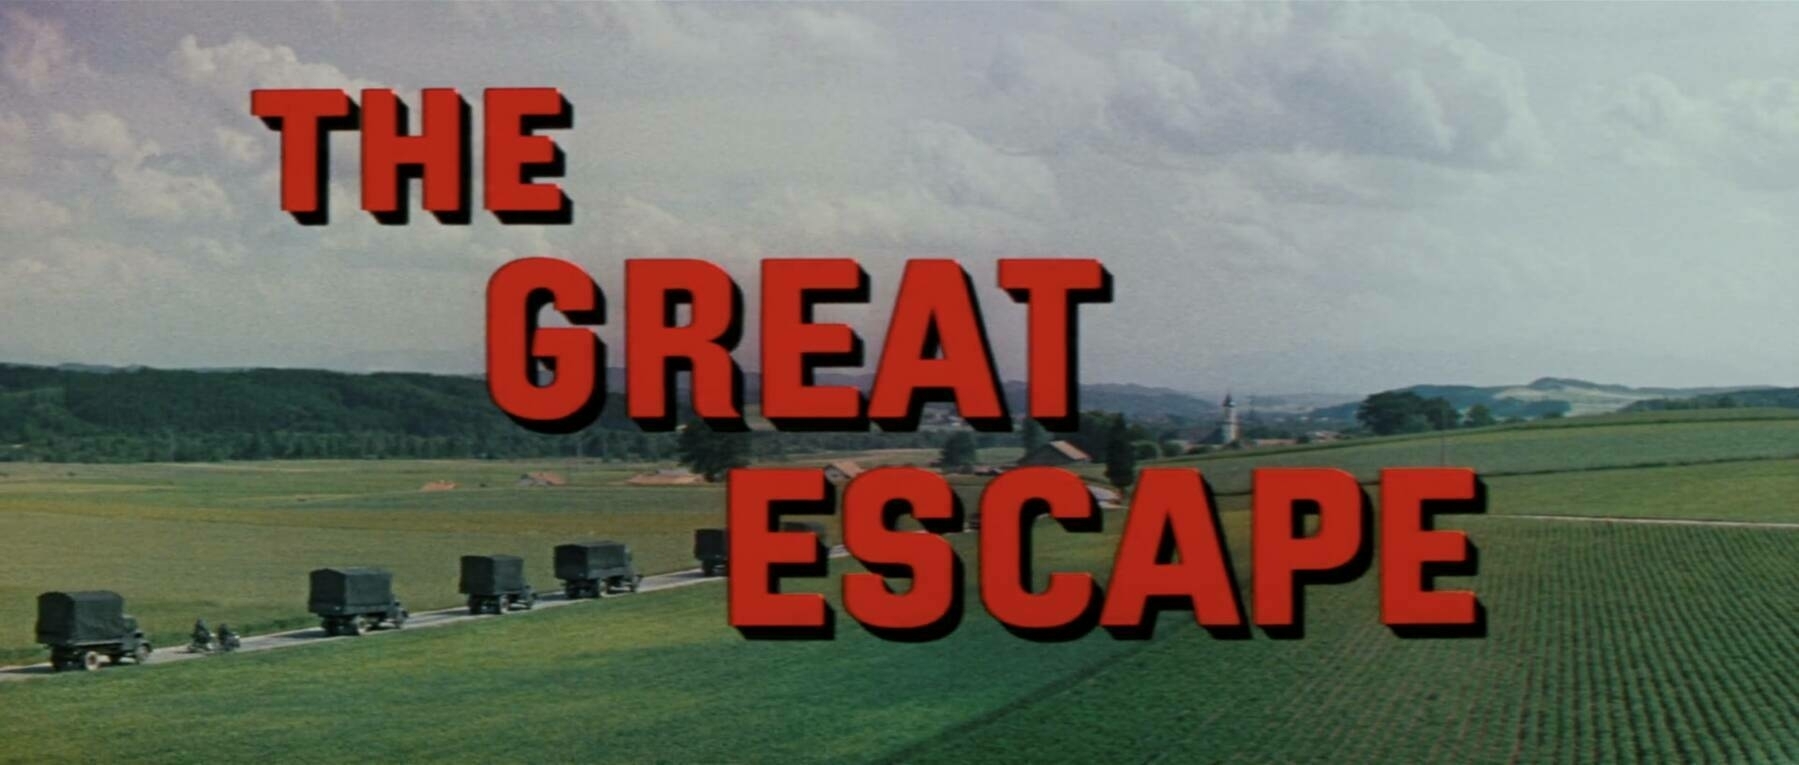 The title card for the film, The Great Escape.